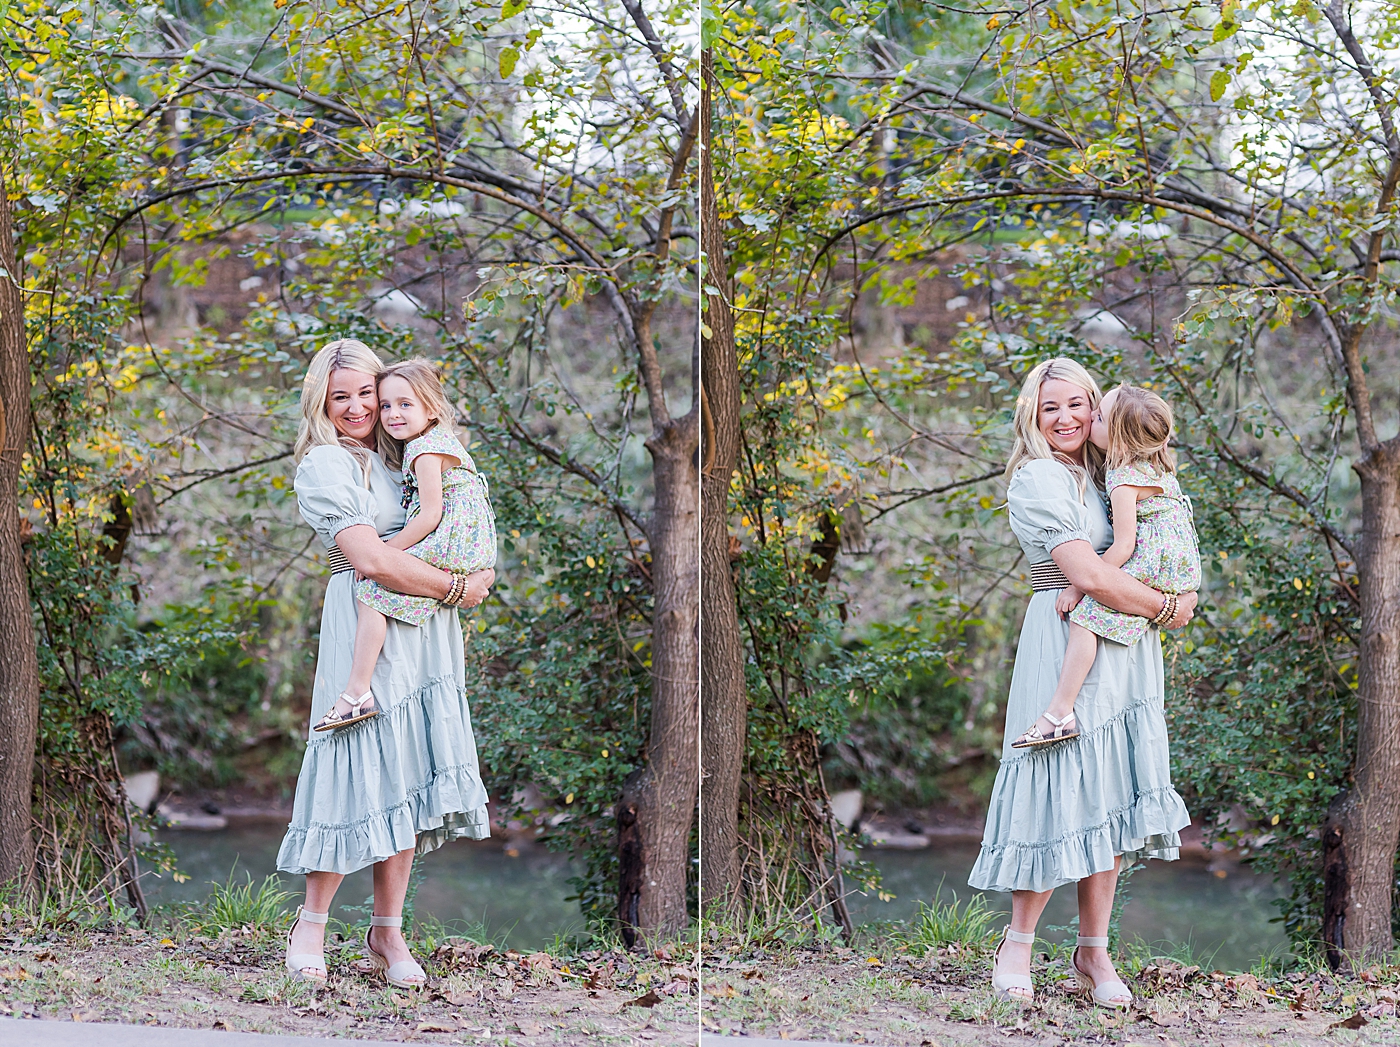 Mom and daughter snuggling in the park | Photo by Anna Wisjo Photography